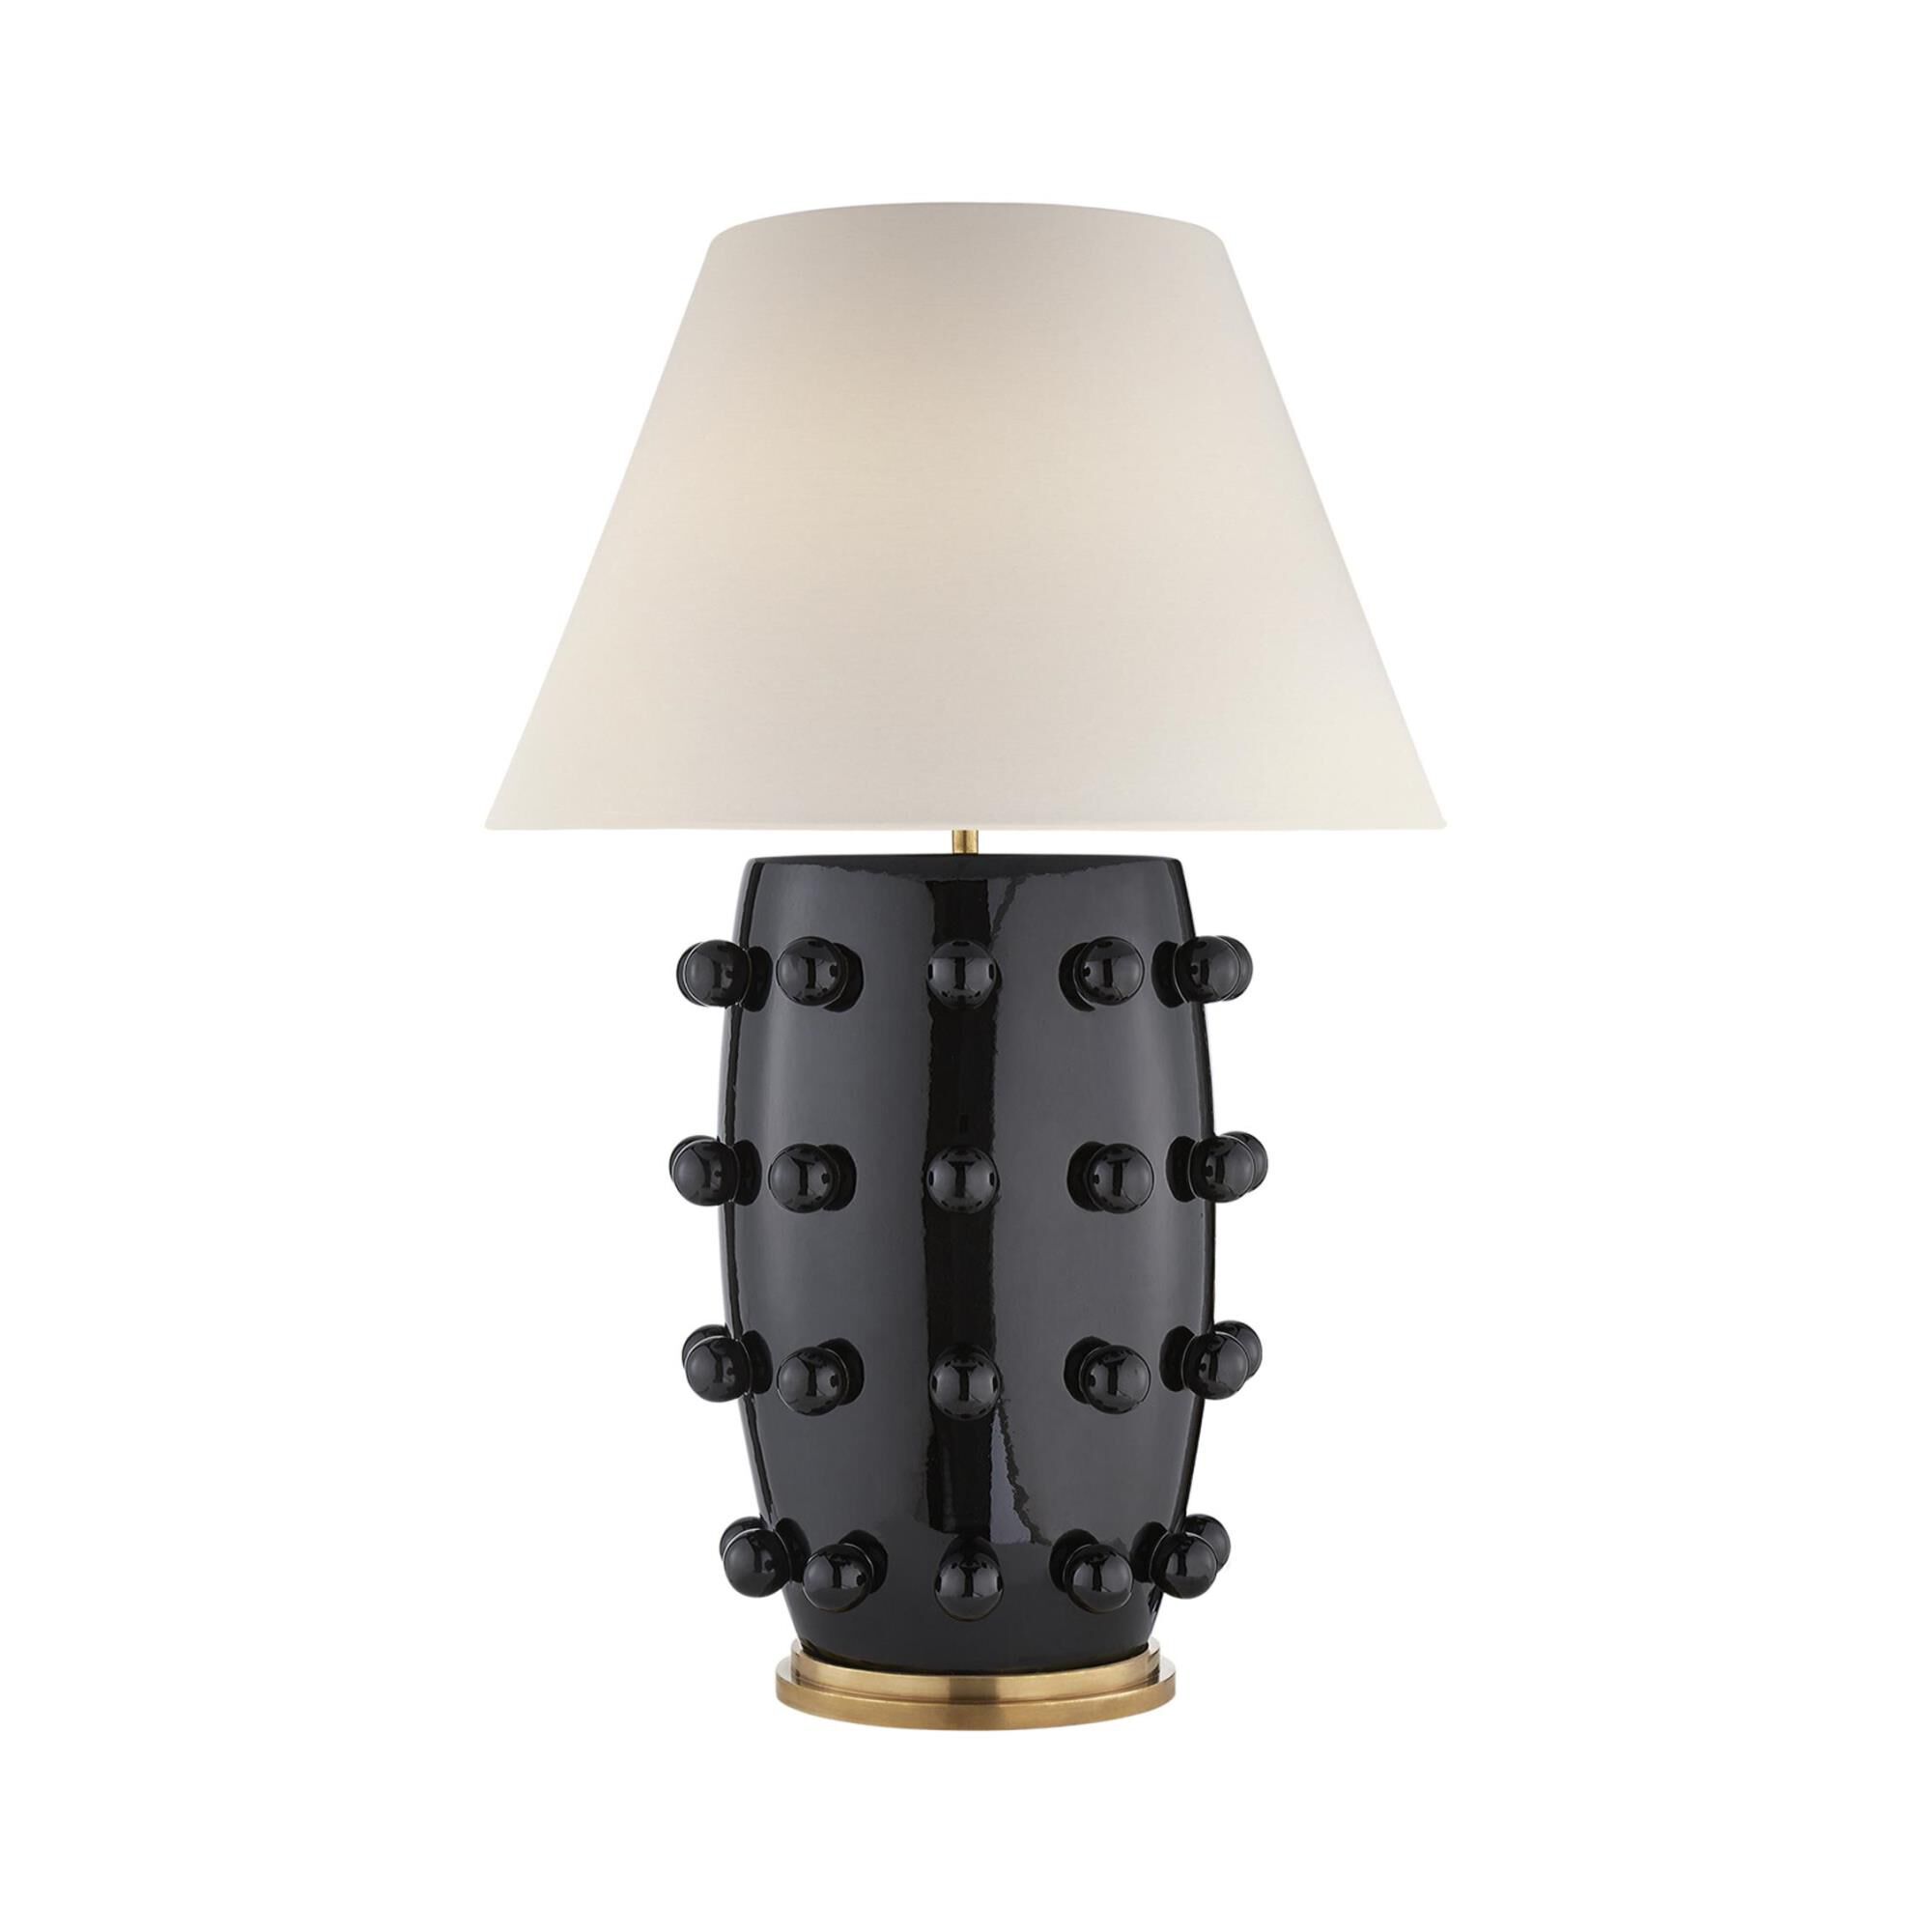 Kelly Wearstler Linden 34 Inch Table Lamp by Visual Comfort and Co. | Capitol Lighting 1800lighting.com